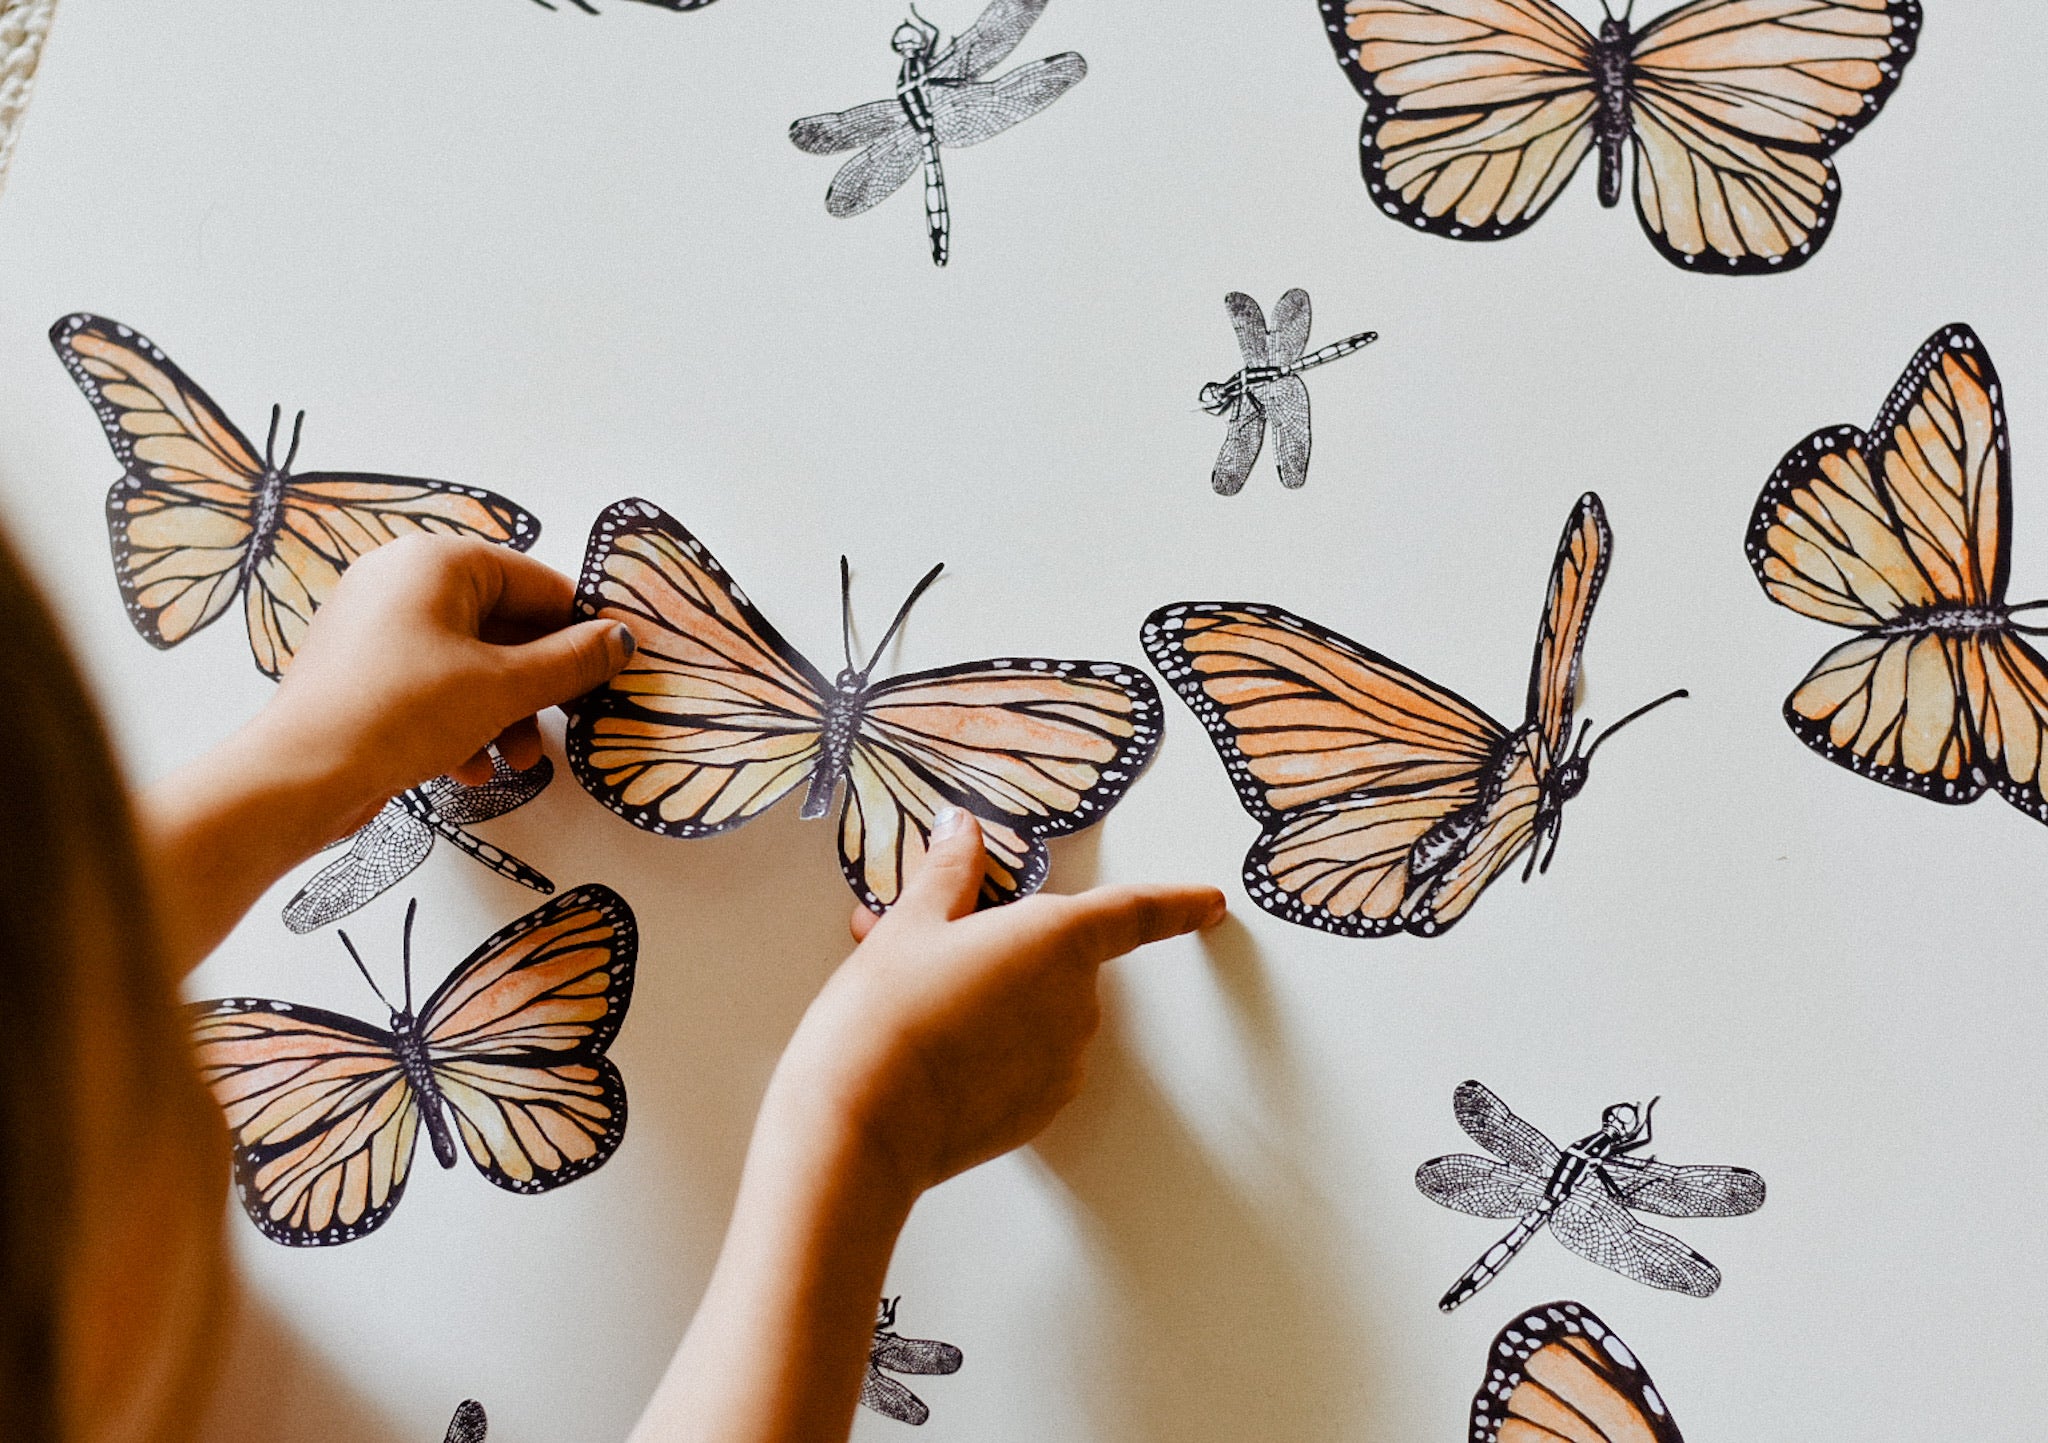 "Follow the Sun" Butterfly Collection - Fabric Wall Decals